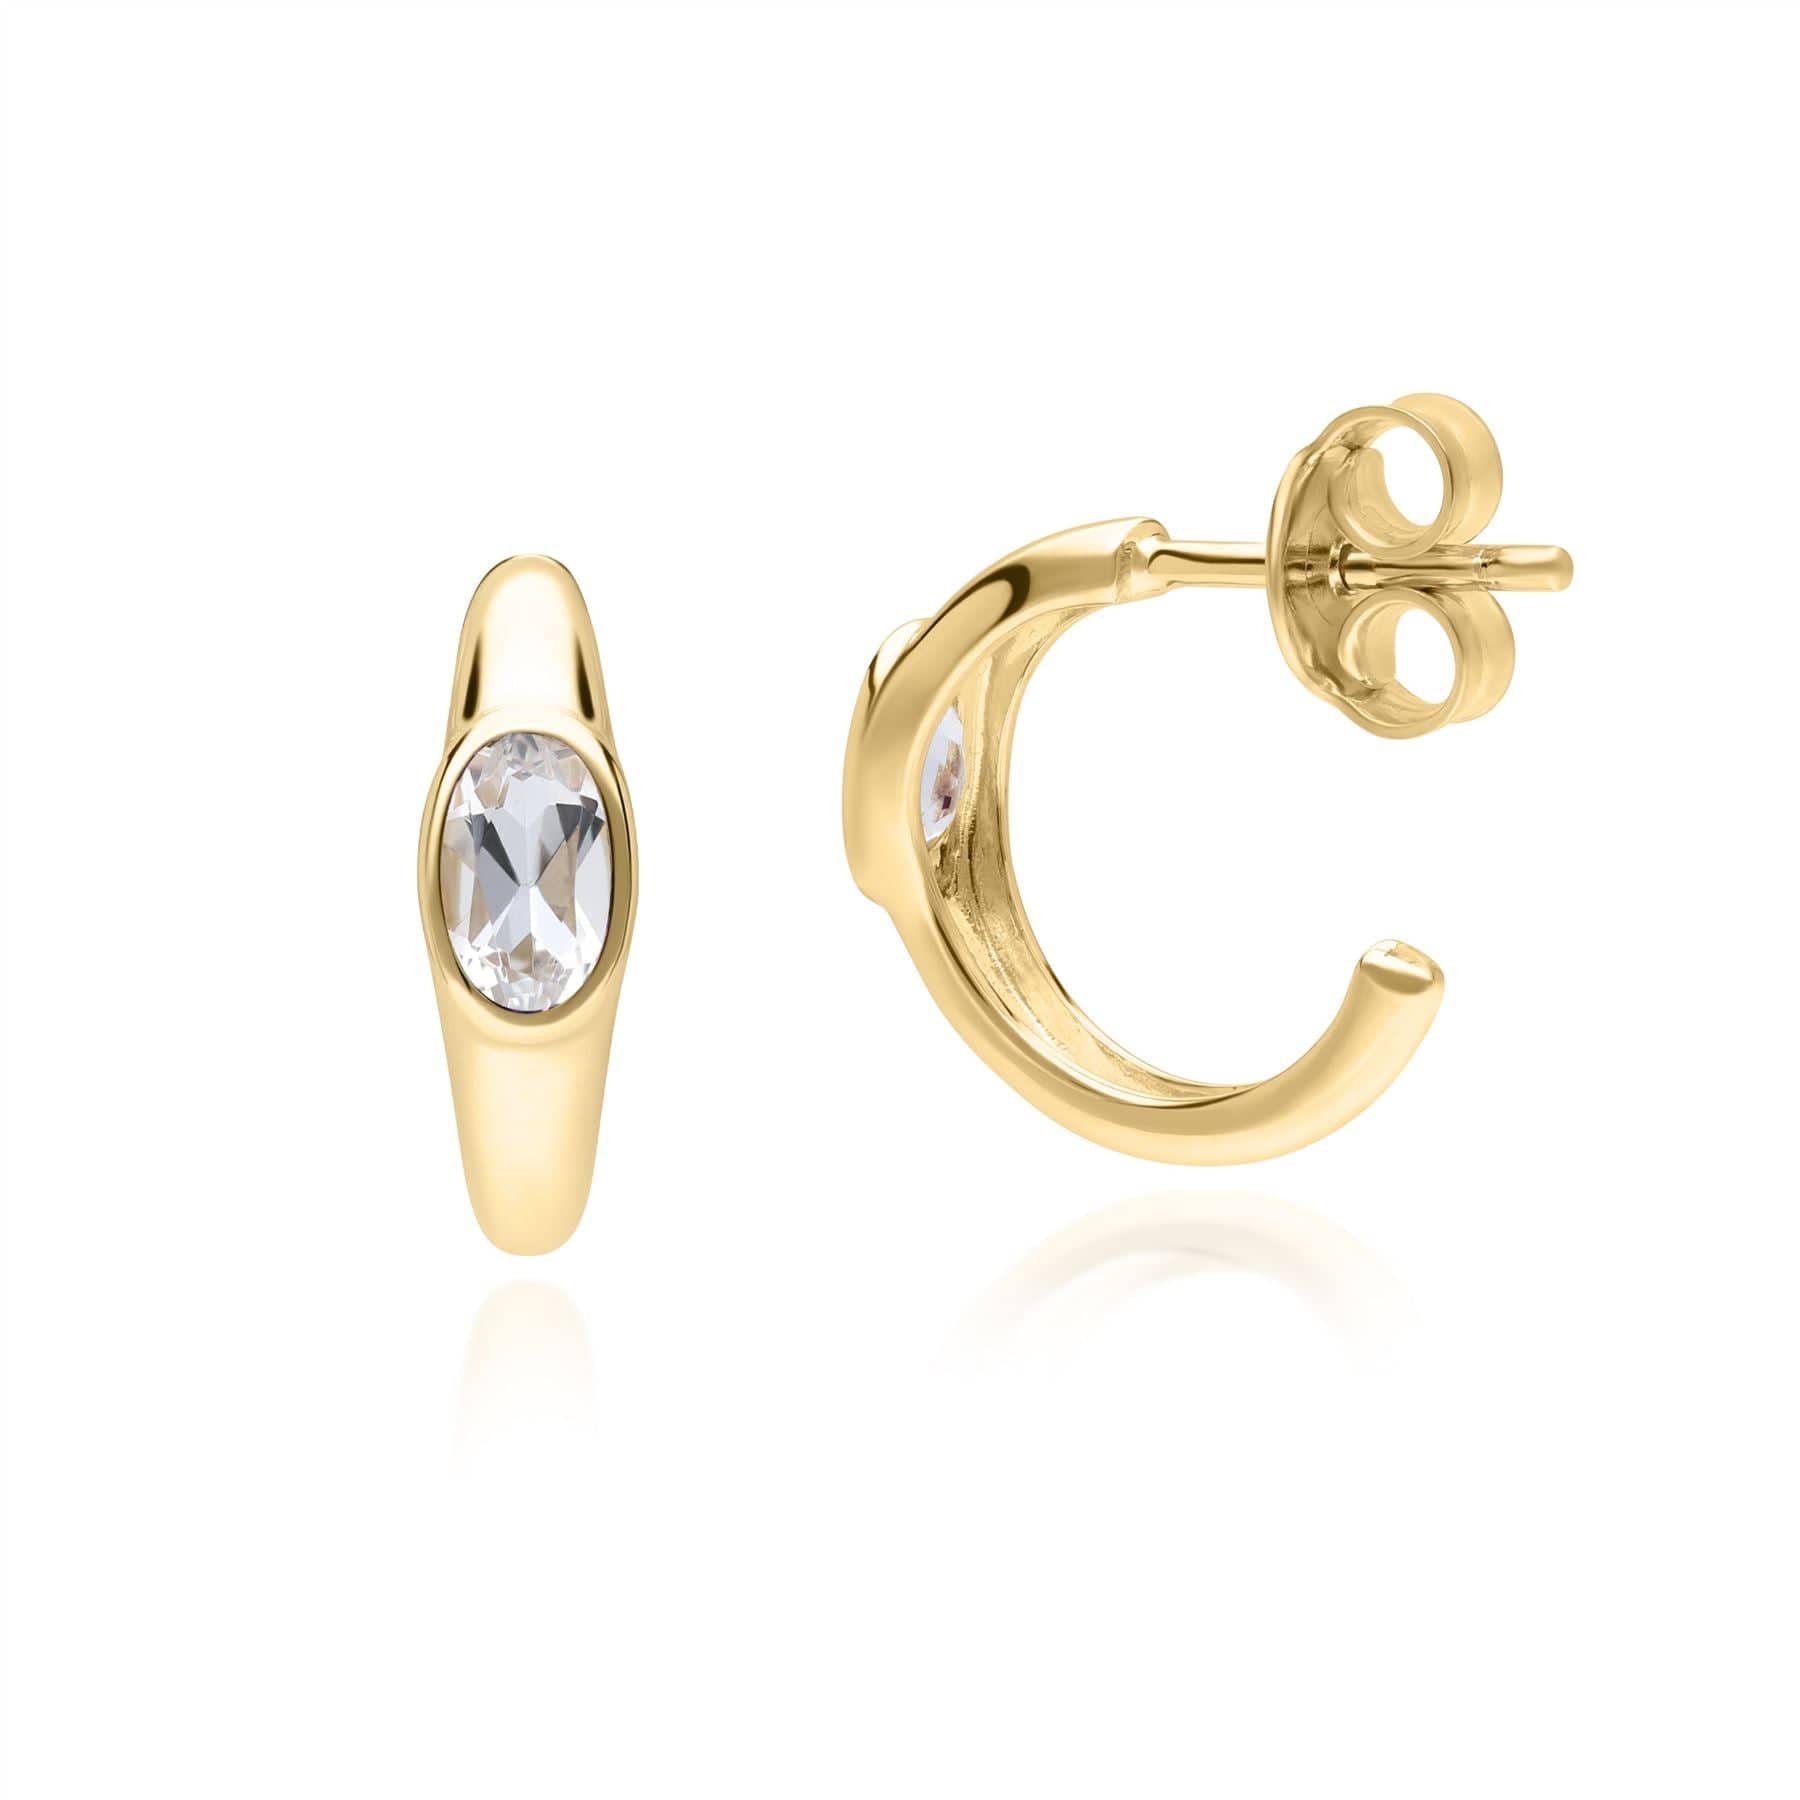 Modern Classic Oval White Topaz Stud Earrings in 18ct Gold Plated Silver - Gemondo